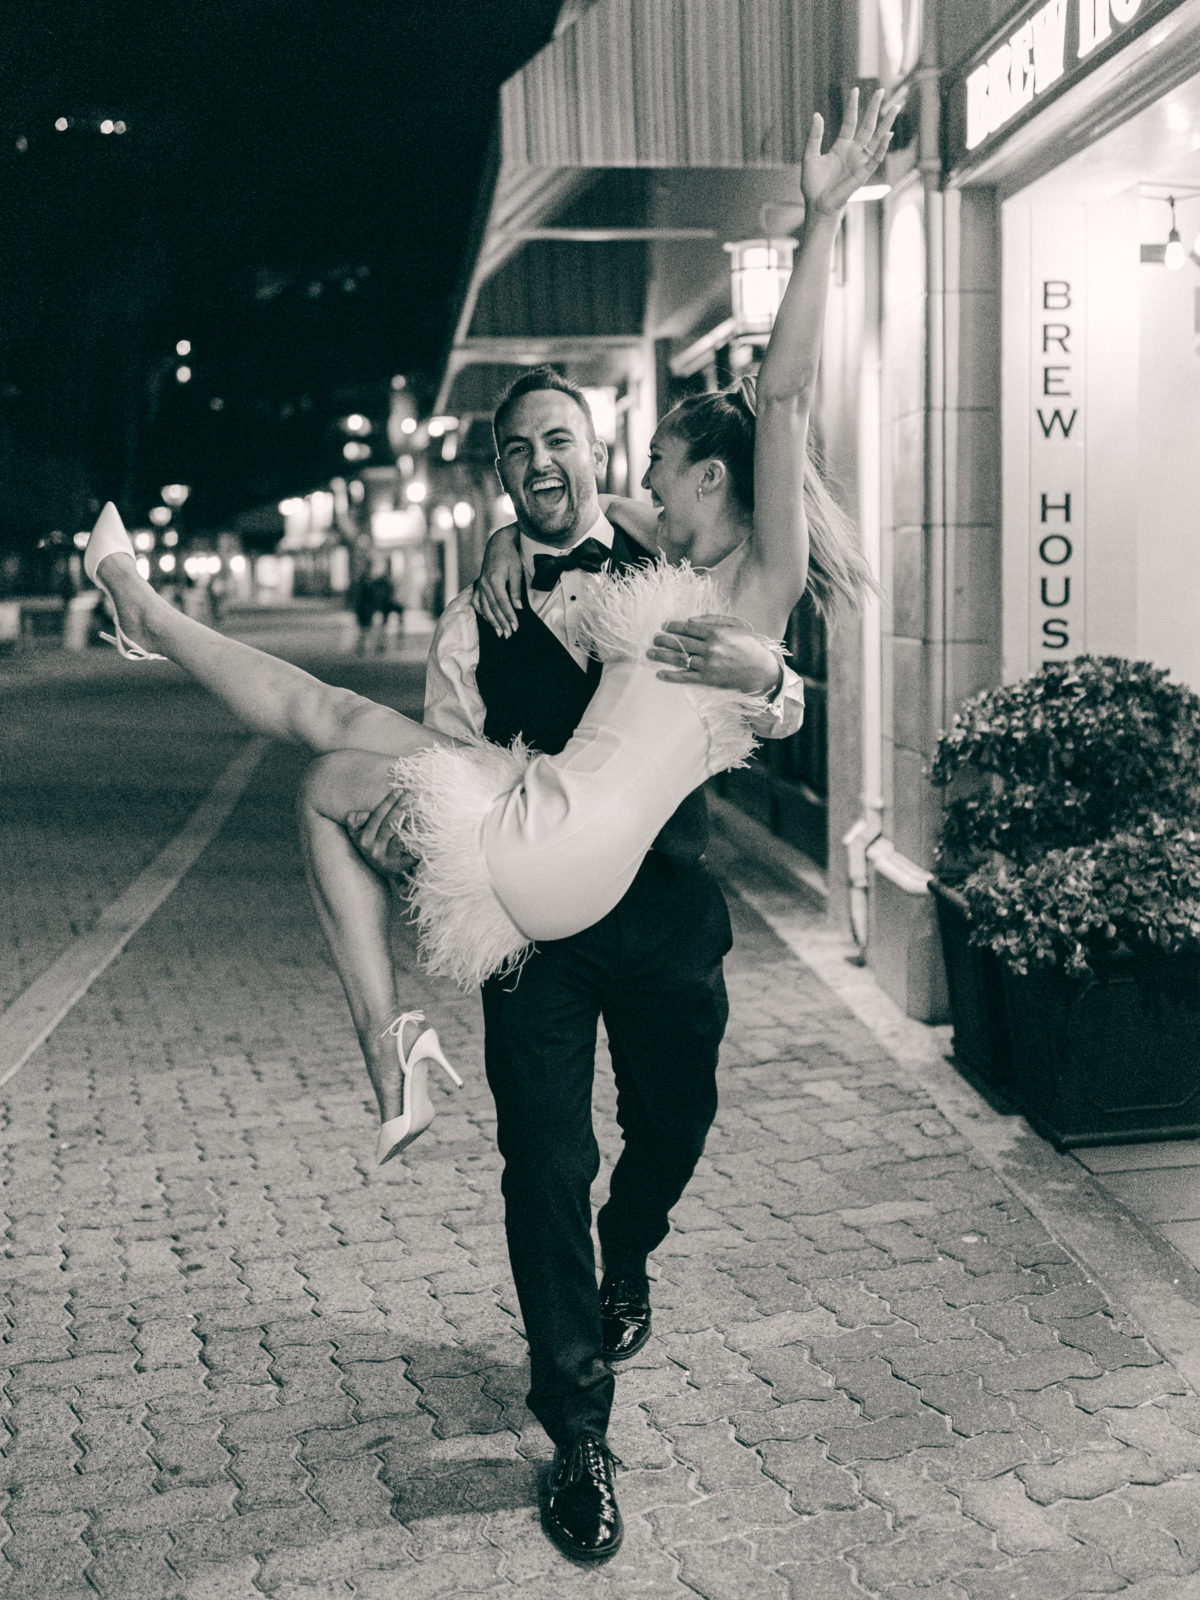 Groom walks with bride in his arms and both are happy and are having fun